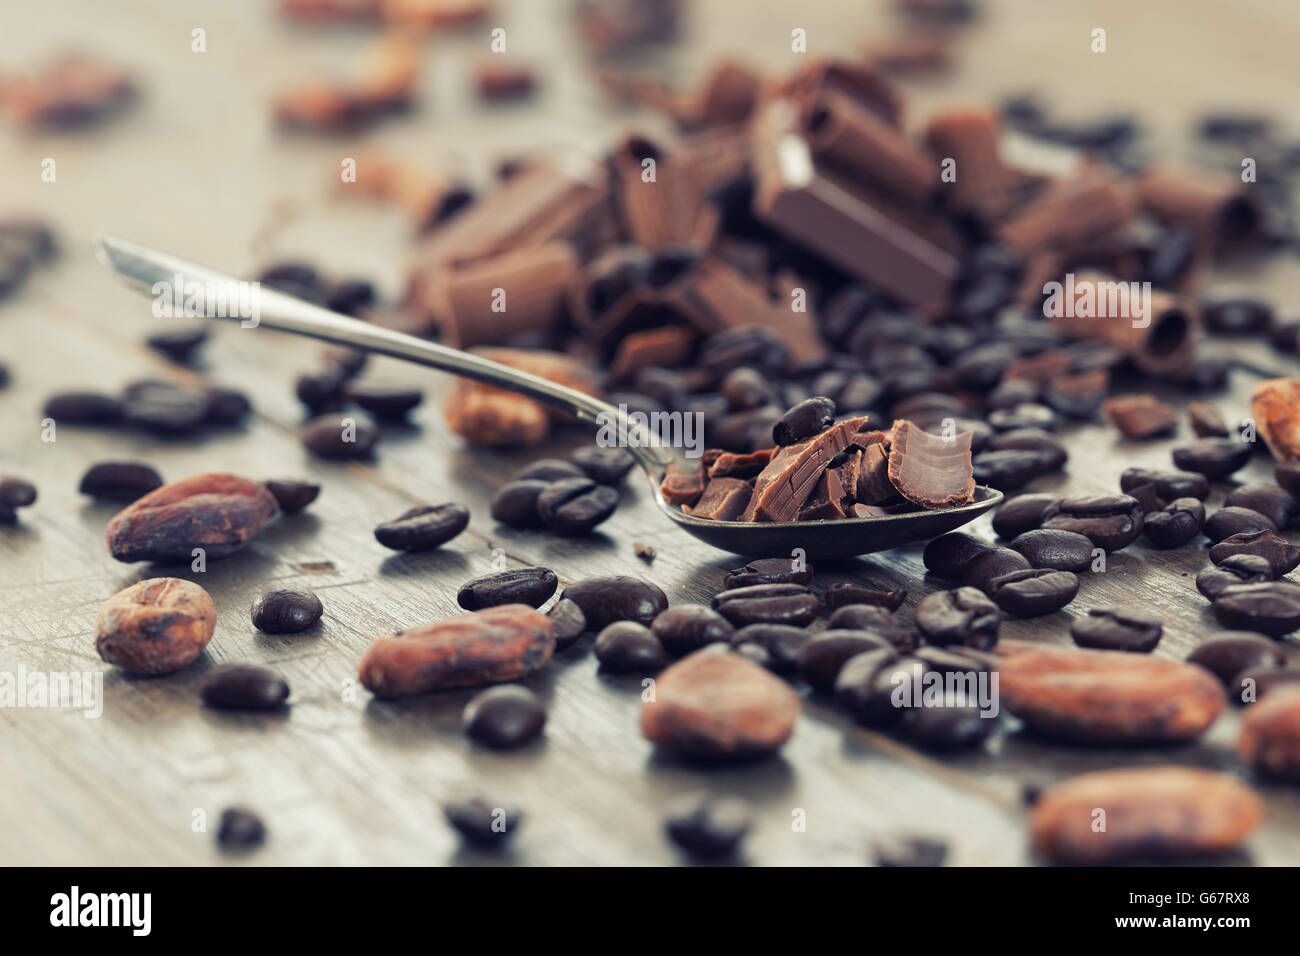 Chocolate pieces with cocoa and coffee beans on a wooden table Stock Photo